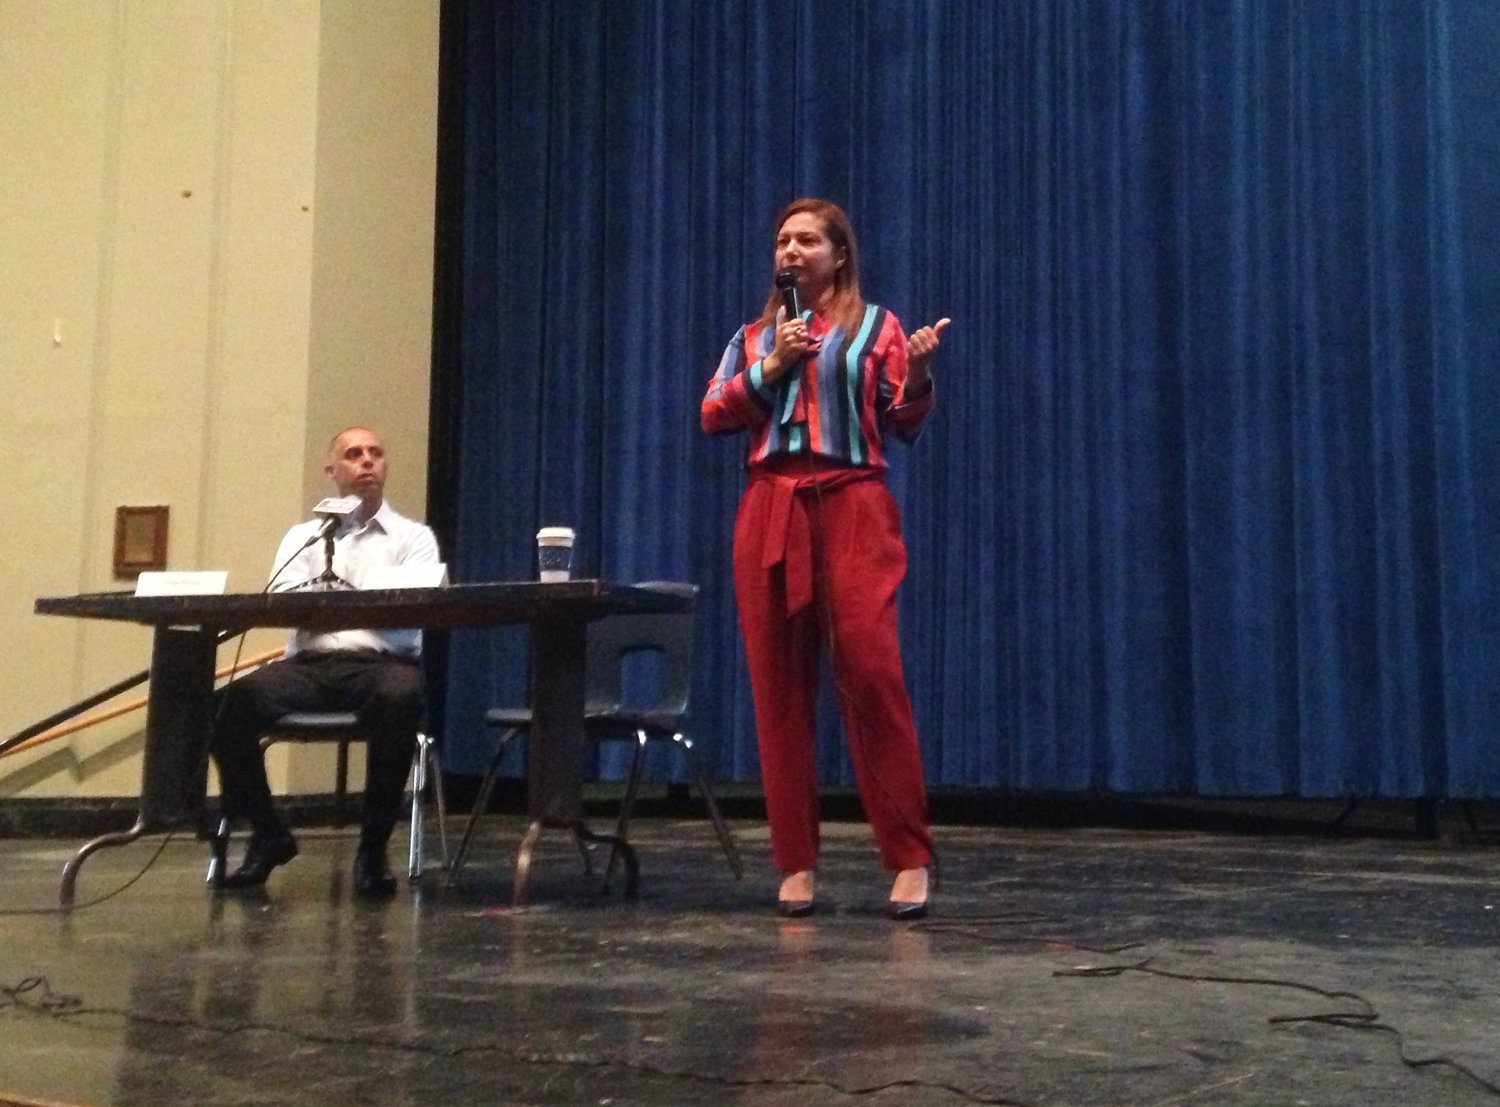 Angelica Infante-Green, right, commissioner of Rhode Island schools, opens a listening session at Hope High School with an extended monologue, Providence Mayor Jorge Elorza, left, spoke first.